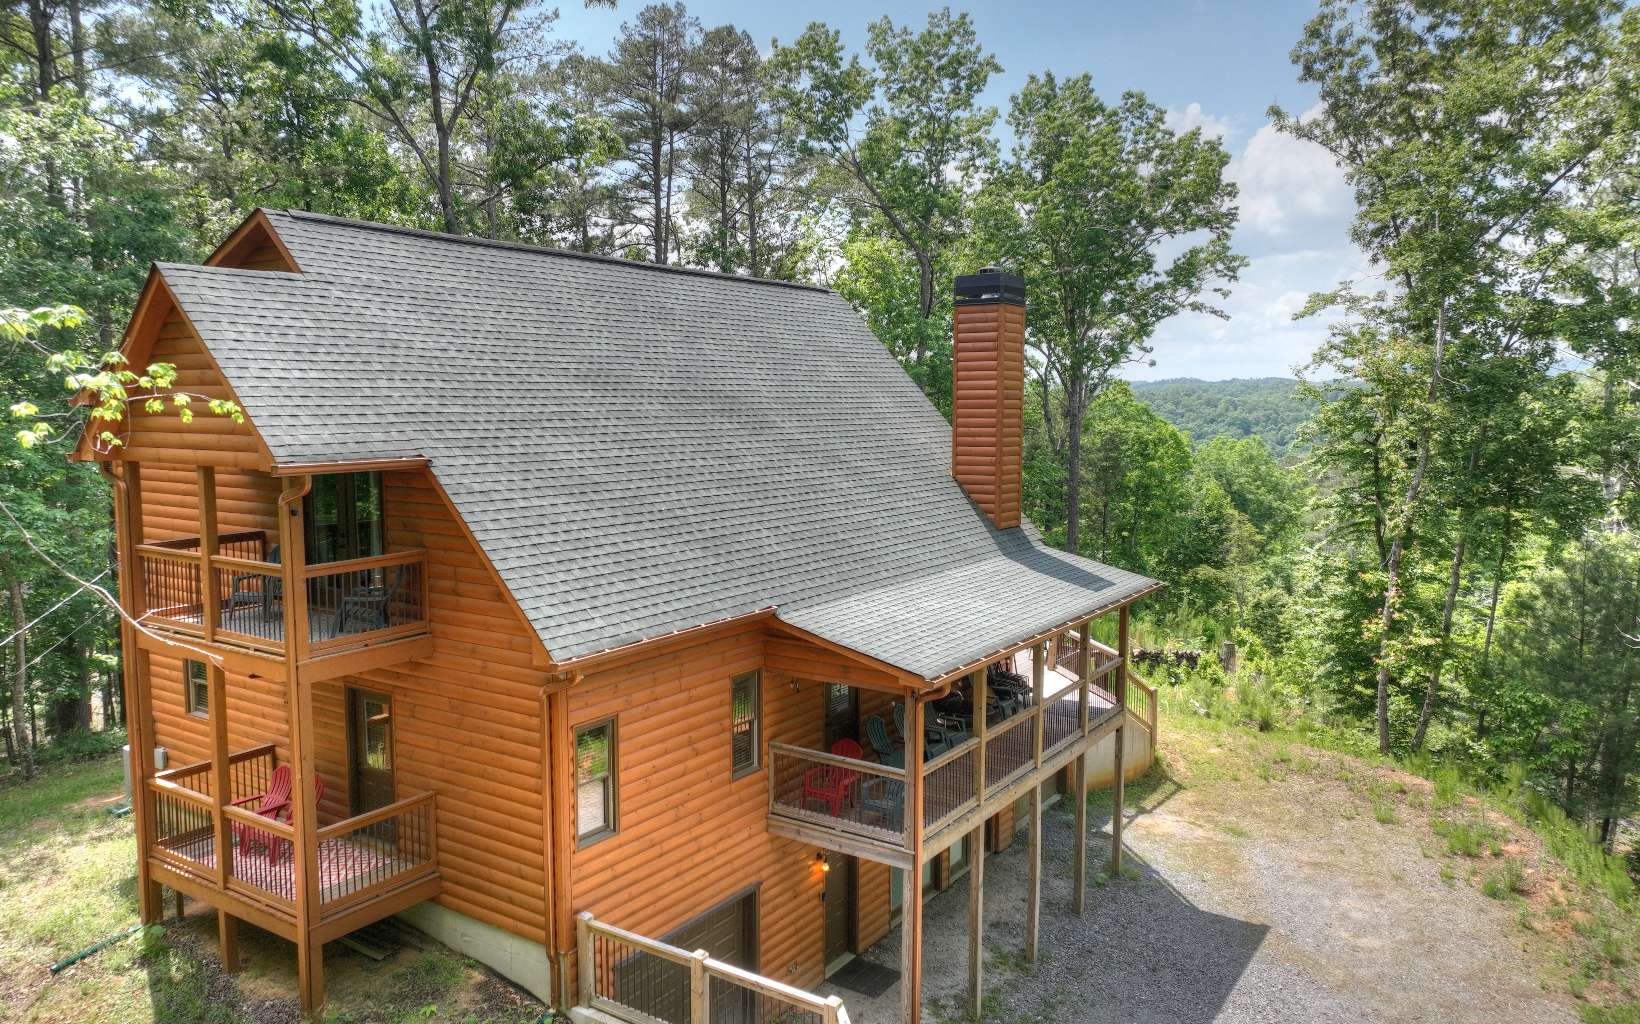 ONE OF A KIND FULLY FURNISHED 2017 CABIN WITH LONG RANGE YEAR ROUND MOUNTAIN VIEWS! If privacy is what you are looking for, this cabin includes 3 lots for a total of 2.58 acres! Features include 2128 square feet, 2 large bedrooms, 2 1/2 baths, vaulted ceilings, open floor plan, granite counters throughout, tile showers, beautiful tongue and groove throughout, a full unfinished basement framed and plumbed for 2 bedrooms and 2 full baths, 2 deep garages, a covered porch area, large deck, covered porches off of each bedroom, and a large yard. This lot does have a small view of Carter's Lake and could have a better view with tree trimming. Enjoy the beautiful sunsets over the North Georgia Mountains! All this in a gated community with amenities for the entire family to enjoy that include 3 pools, an indoor pool, tennis courts, river access with covered pavilion/picnic area, fitness center, duck ponds, tubing, and more!